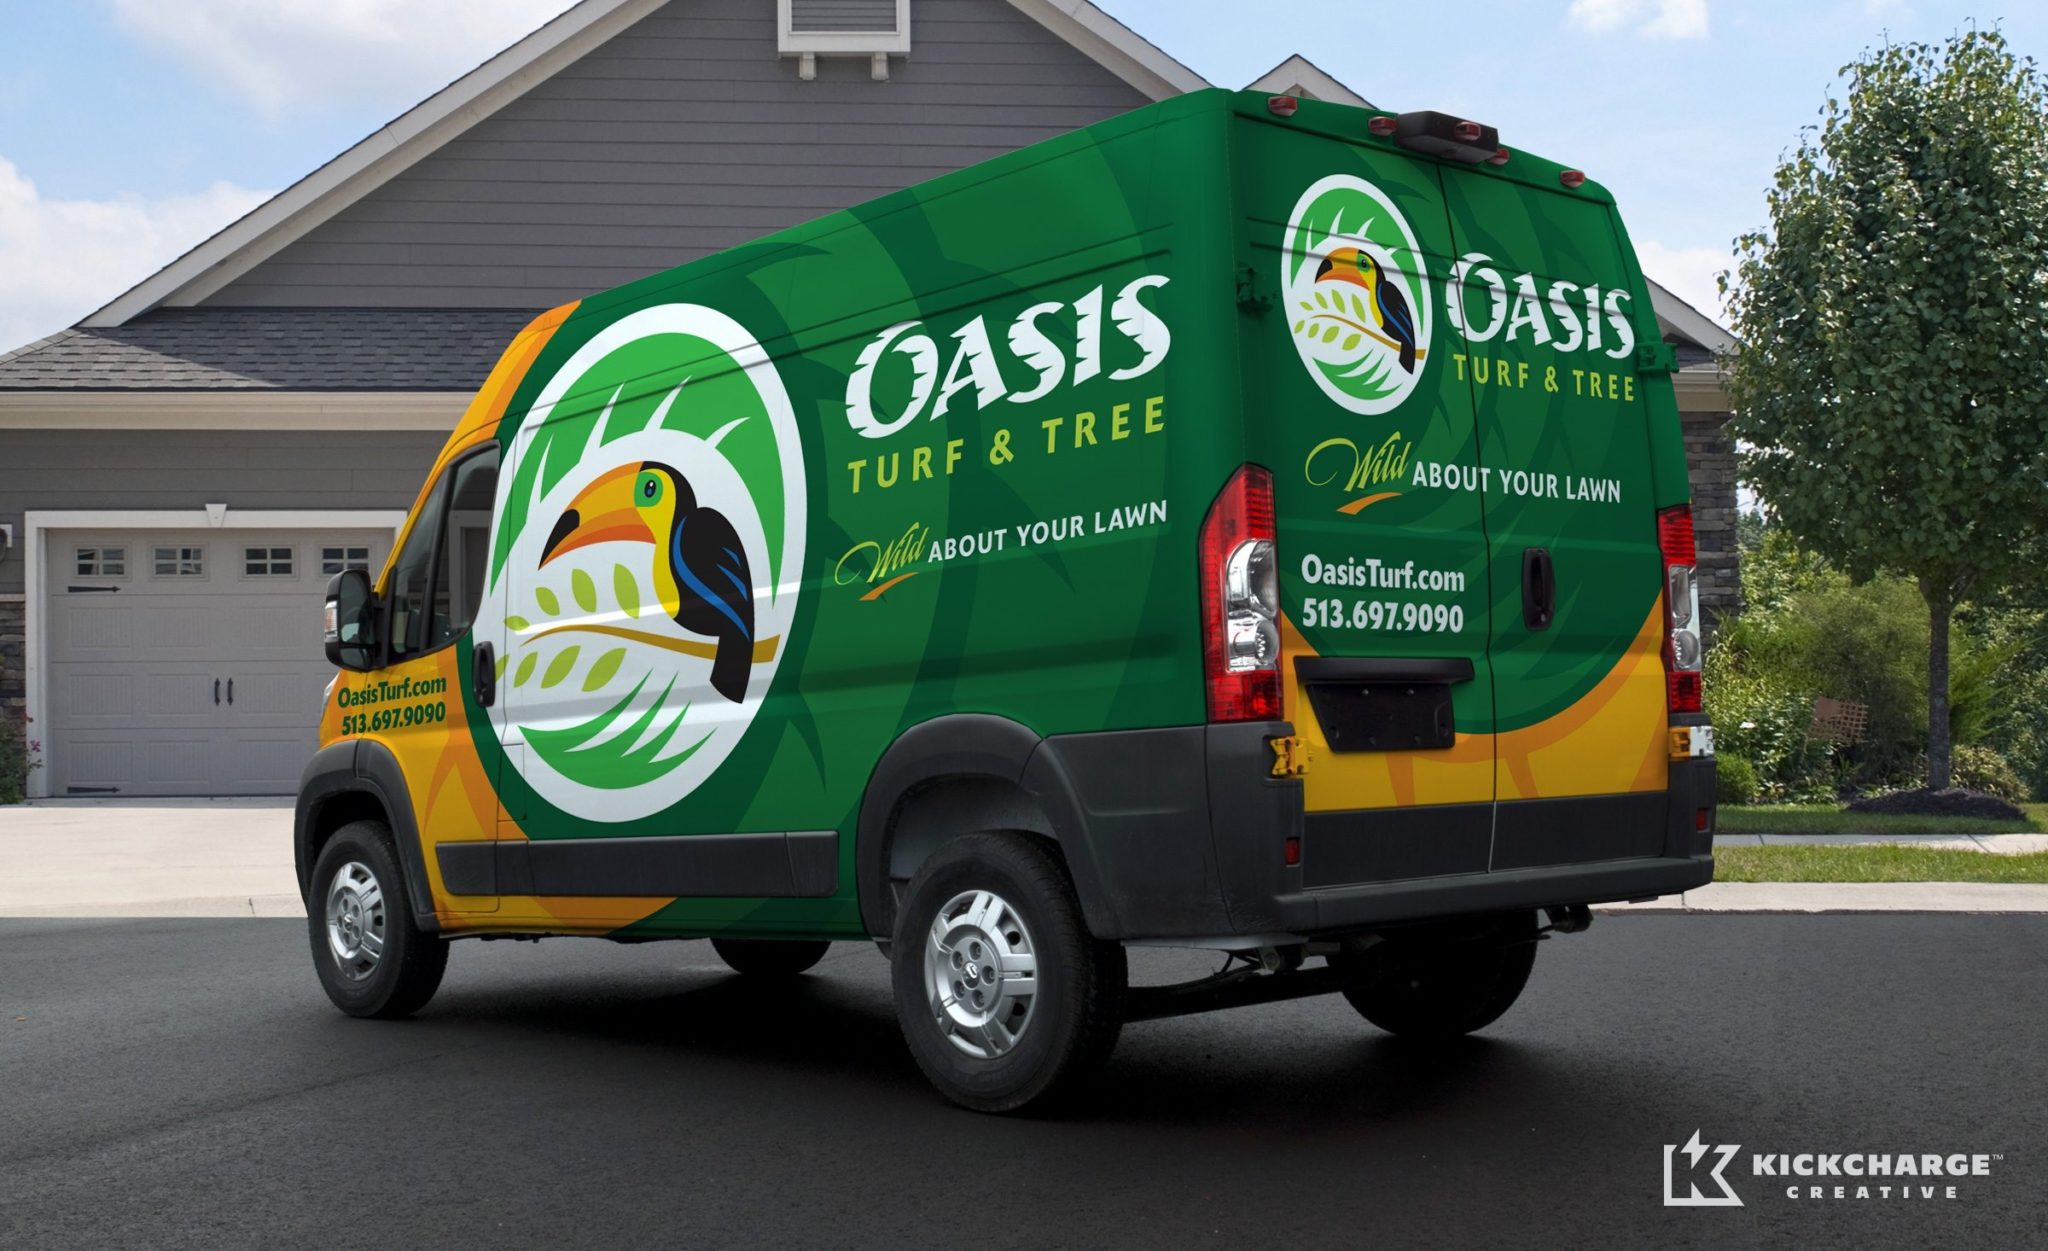 Award winning truck wrap design for Oasis Turf and Tree, based in Ohio. This award-winning truck wrap design was the winner of the 2014 “(Up)fit for Success” contest, sponsored by Mercedes-Benz Sprinter and Inc.